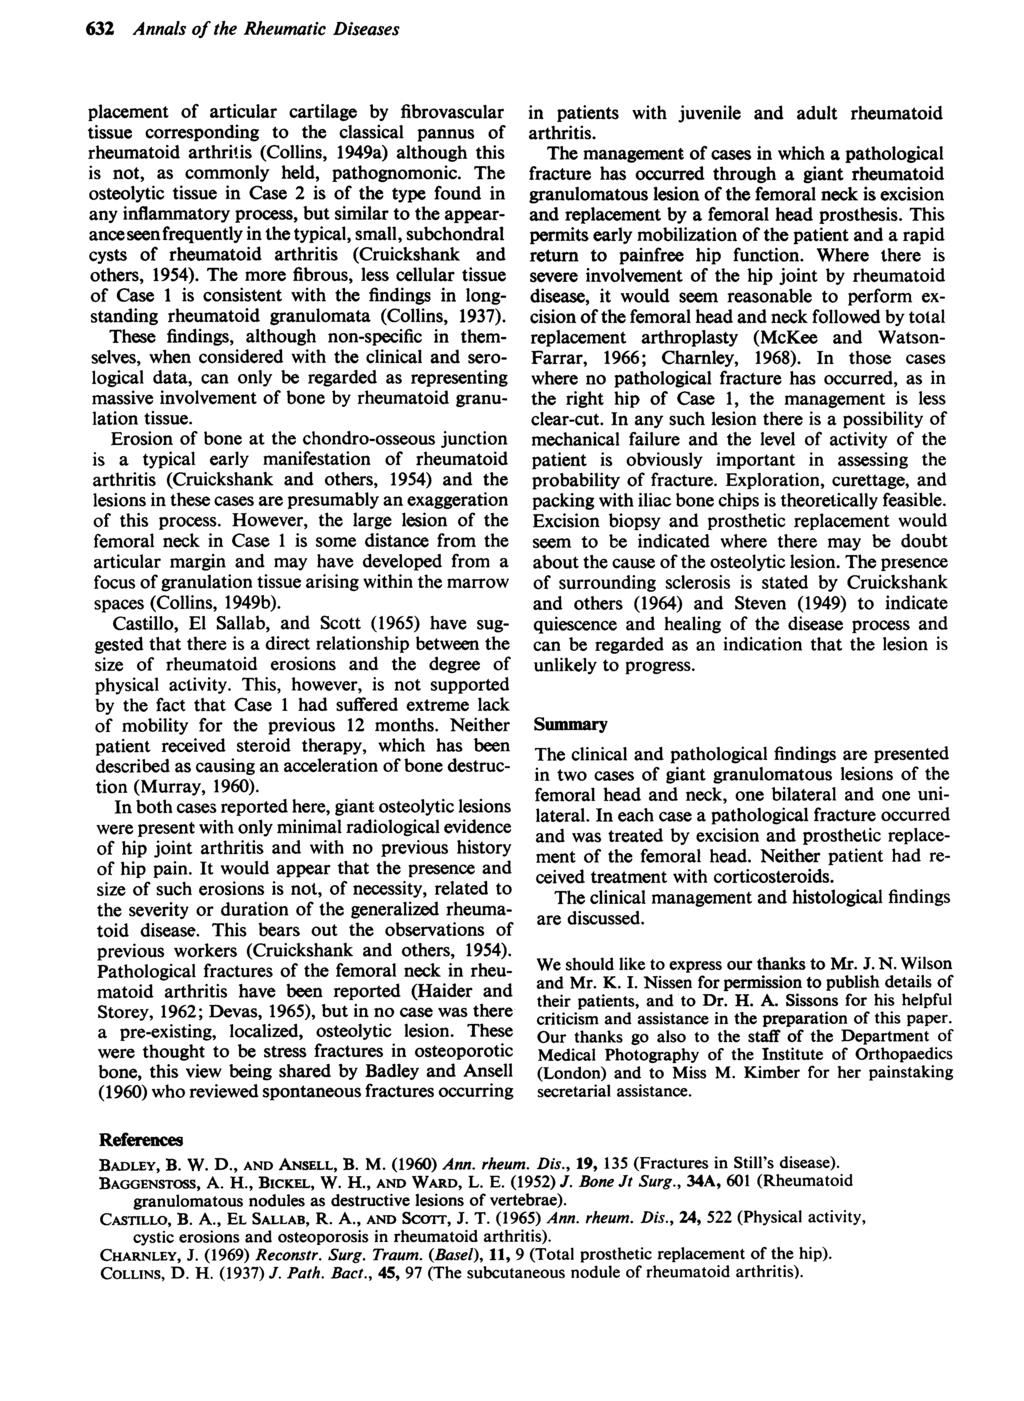 632 Annals of the Rheumatic Diseases placement of articular cartilage by fibrovascular tissue corresponding to the classical pannus of rheumatoid arthritis (Collins, 1949a) although this is not, as